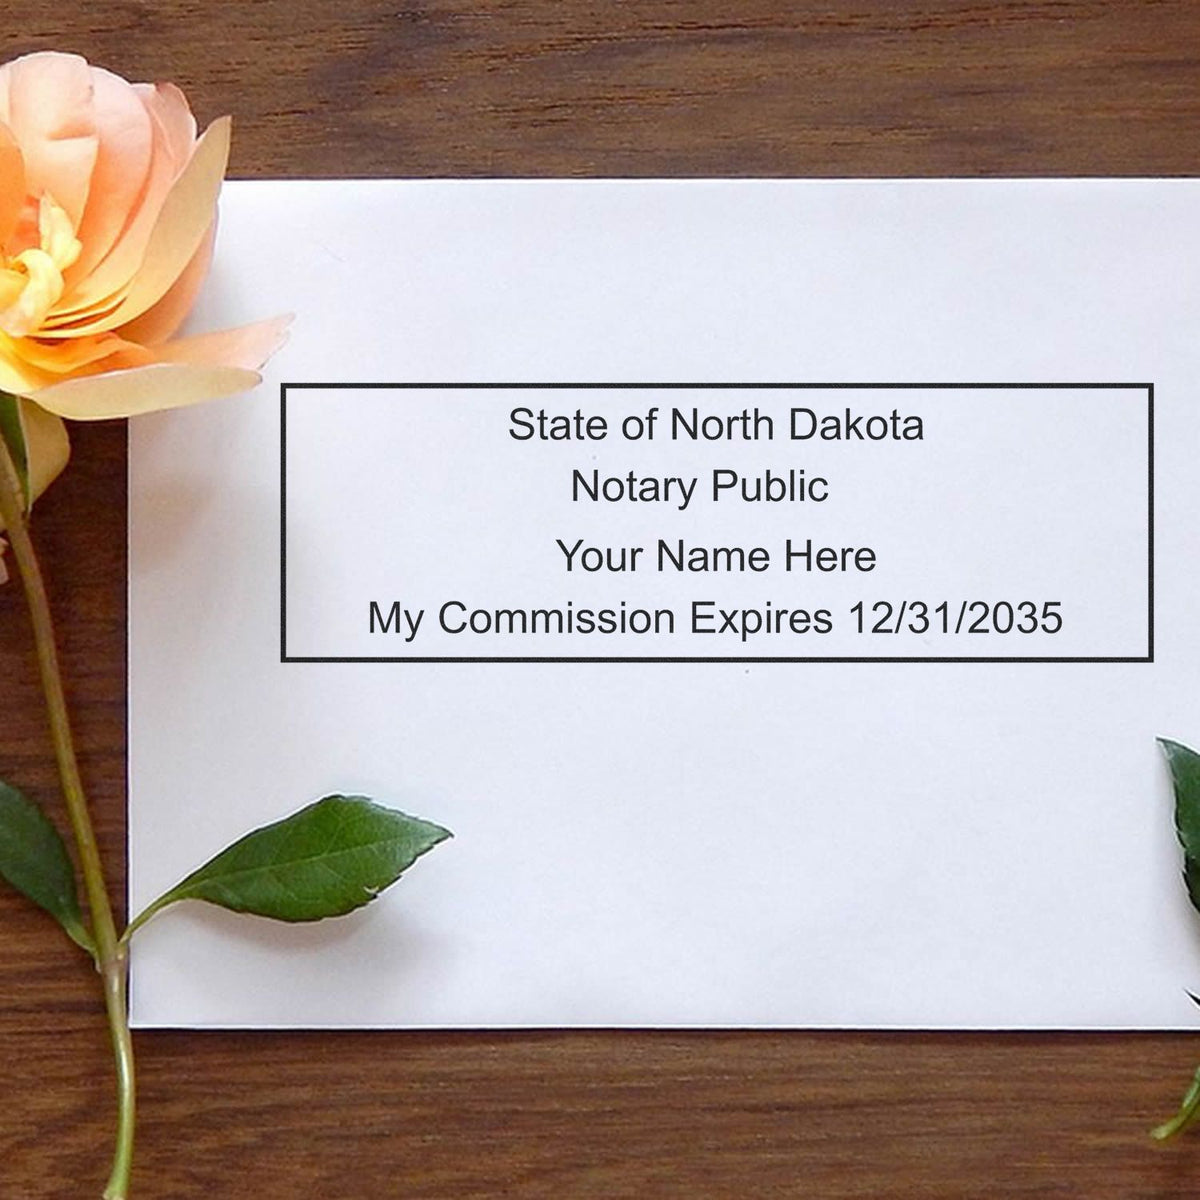 A lifestyle photo showing a stamped image of the Heavy-Duty North Dakota Rectangular Notary Stamp on a piece of paper